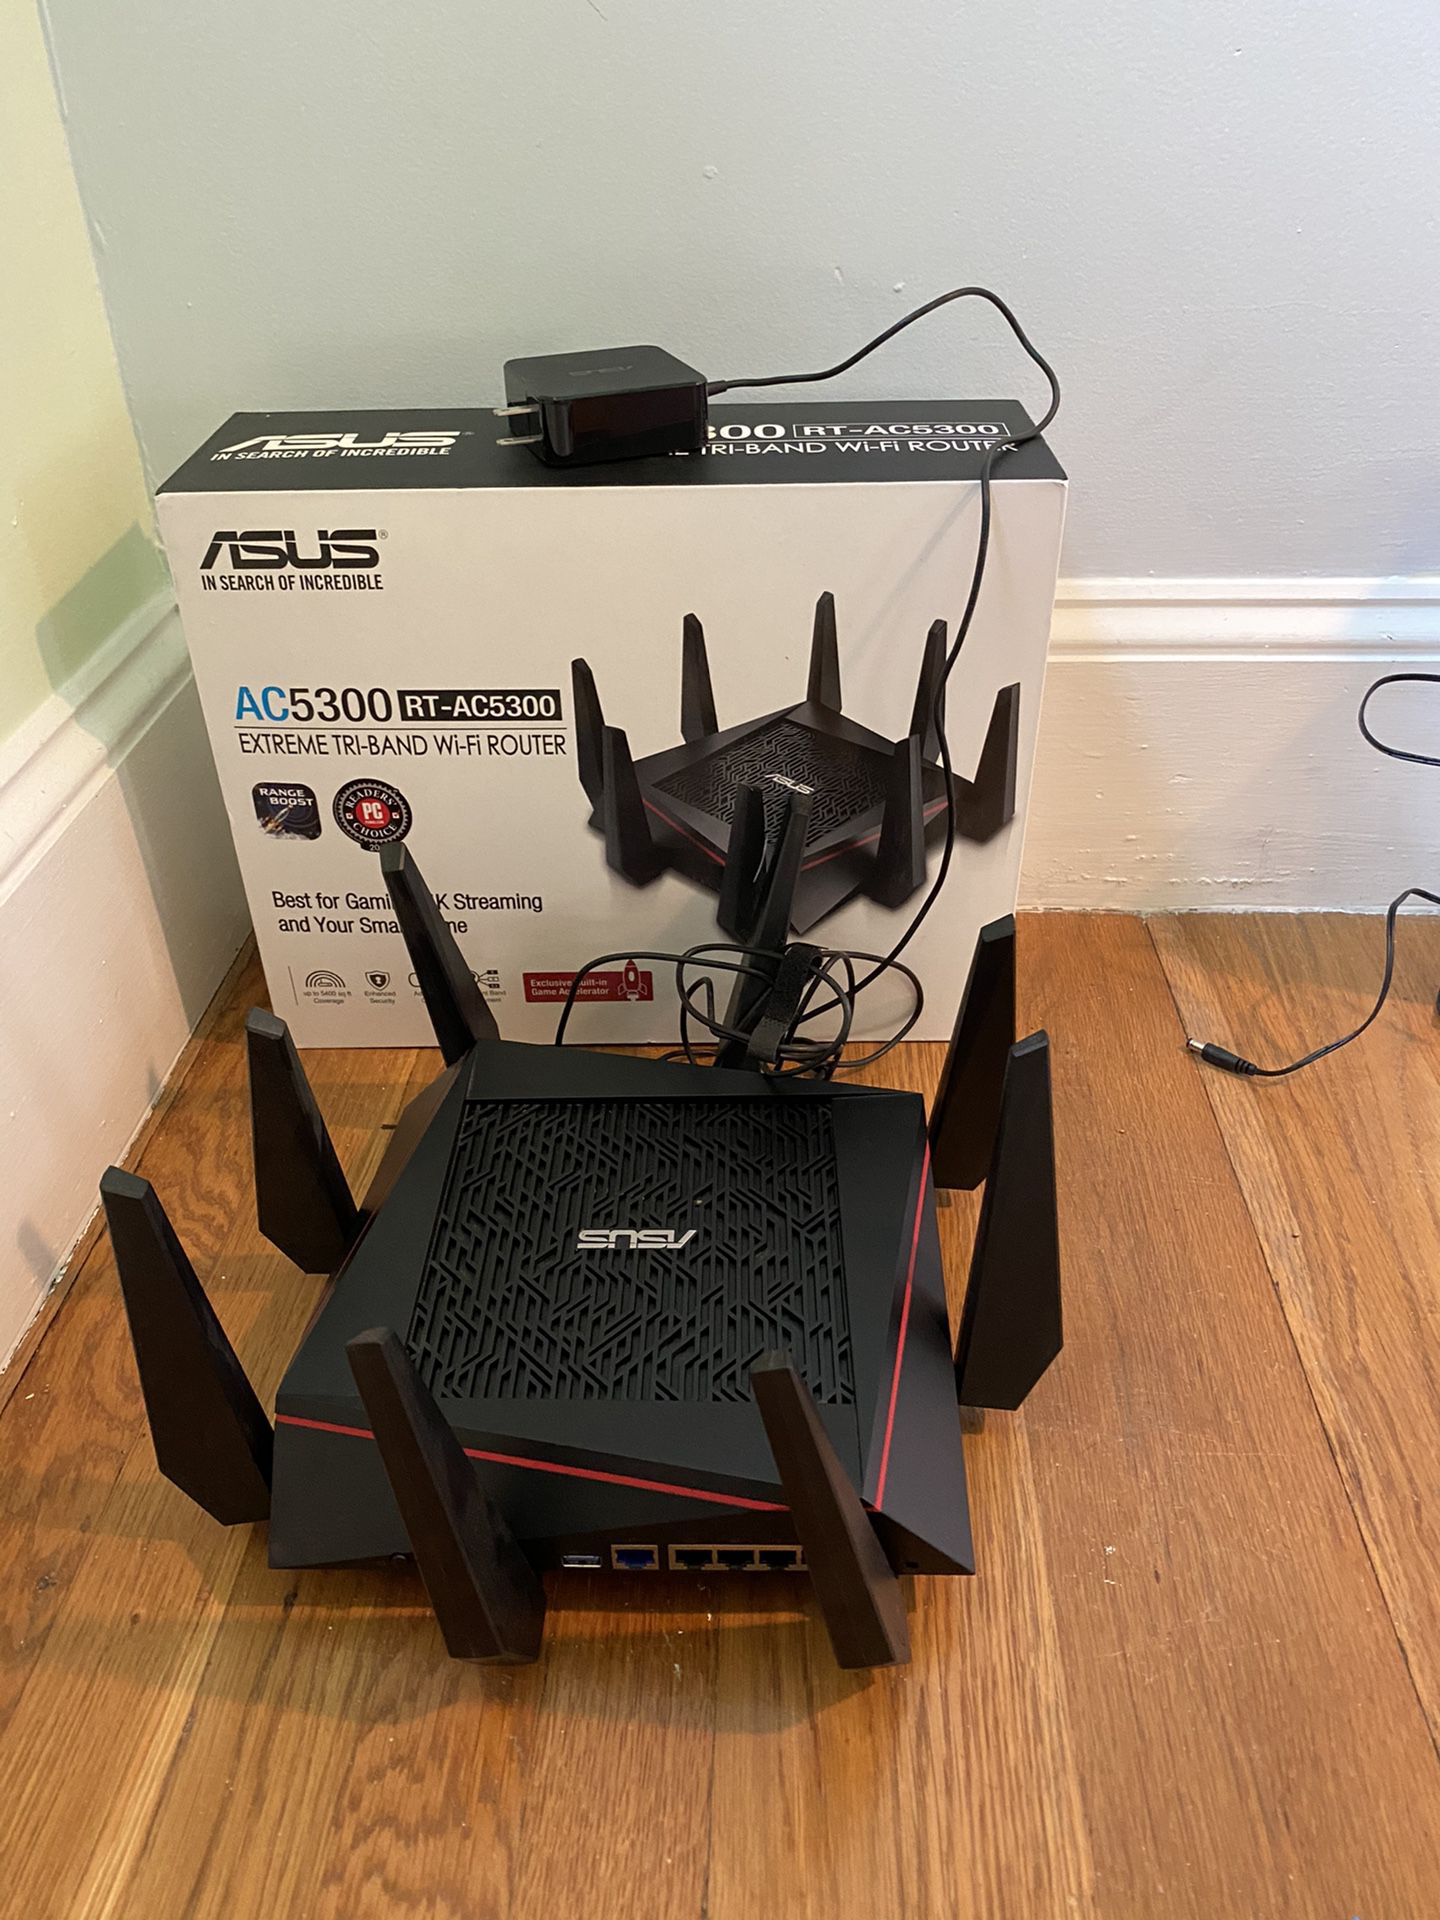 ASUS RT-AC5300 Extreme Extreme Tri-Band WiFi Router